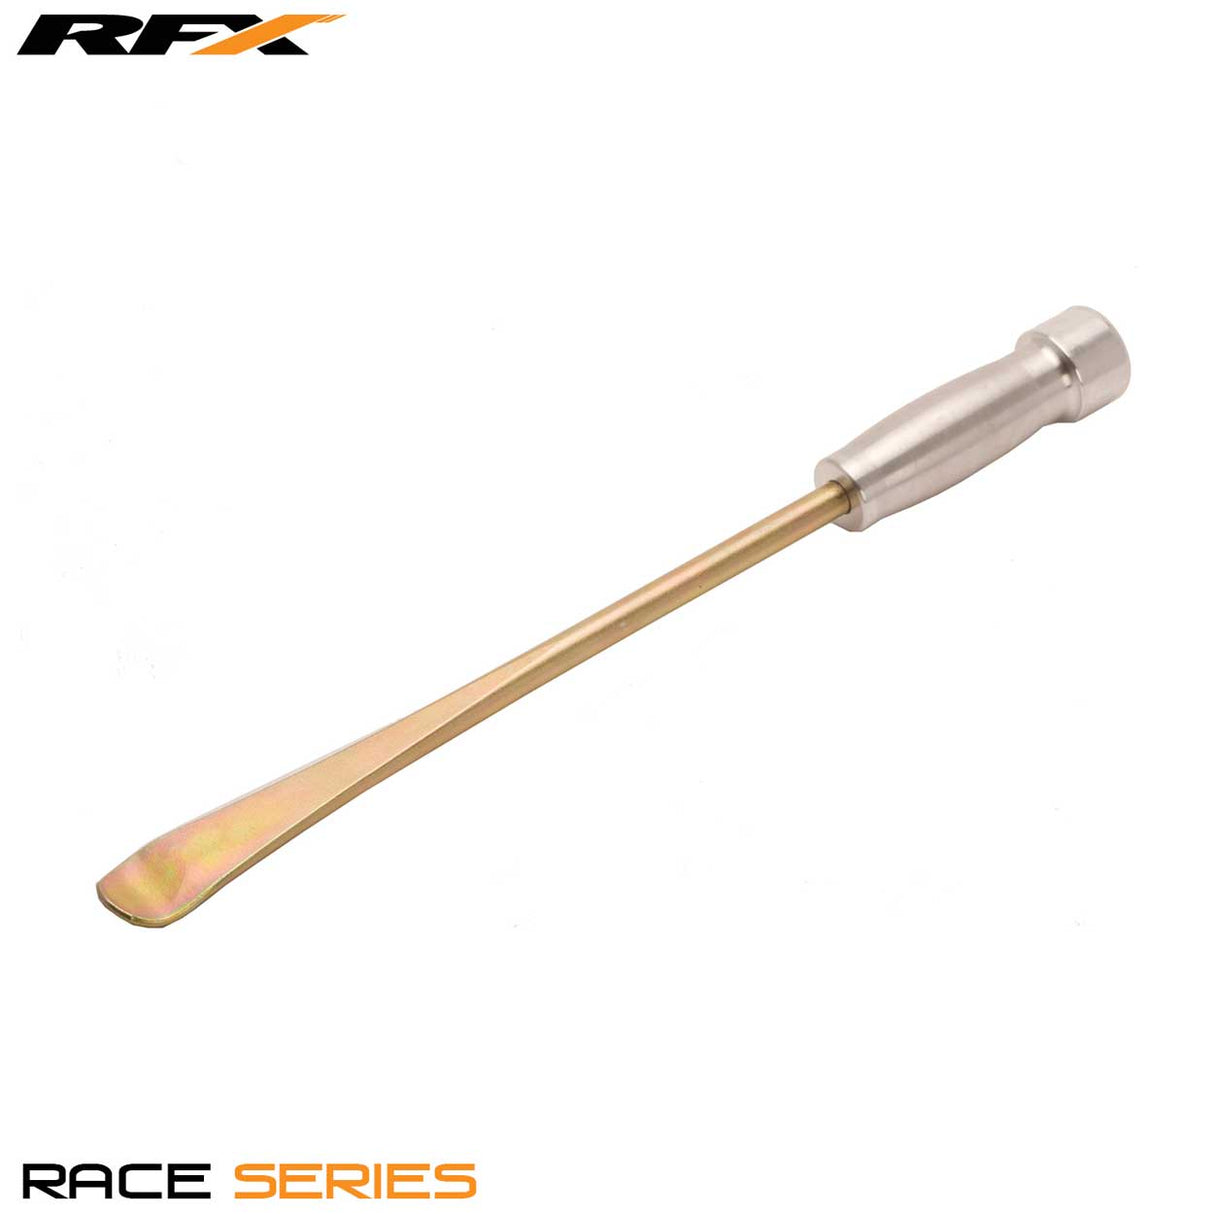 RFX Race Single Spoon end Tyre Lever Mousse Type with Silver Handle 420mm / 17in Long